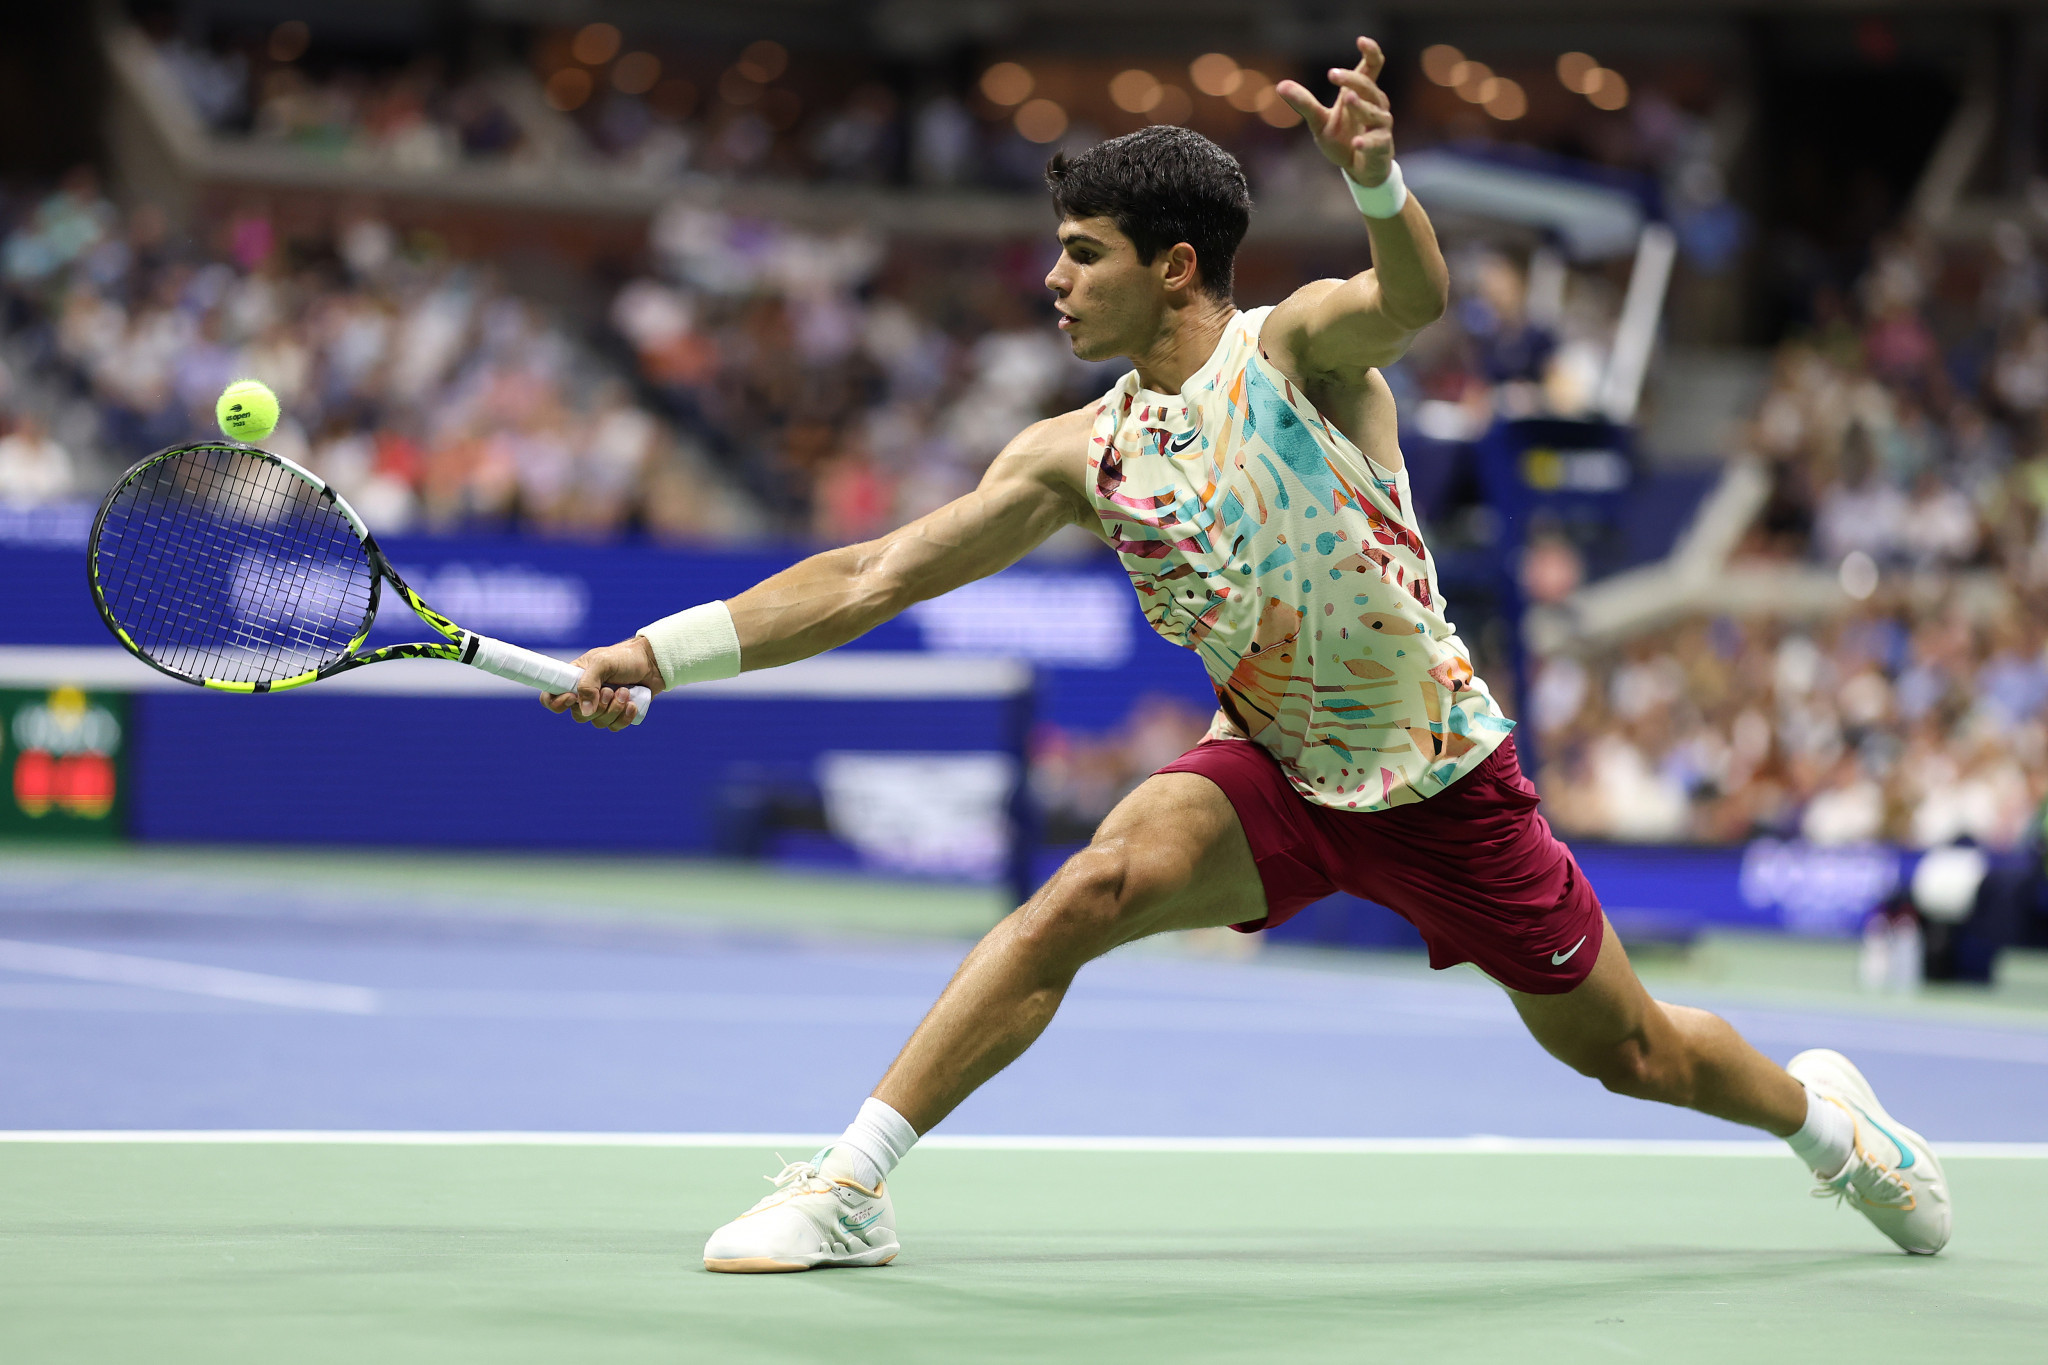 Spain's defending US Open champion Carlos Alcaraz is into the men's singles second round after opponent, Germany's Dominik Koepfer, was forced to retire due to injury ©Getty Images